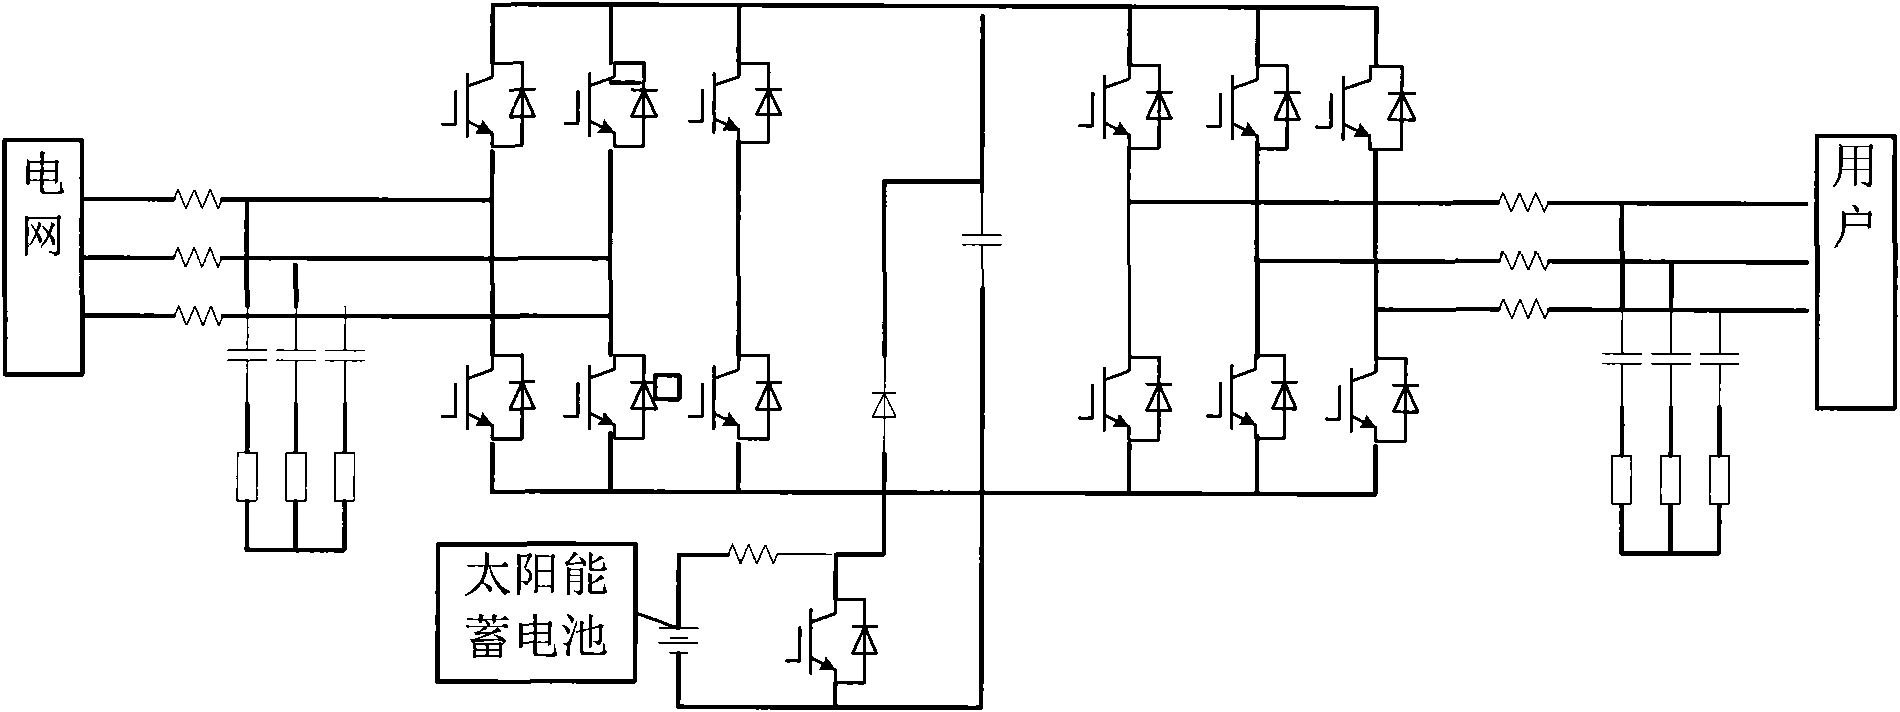 Double PWM inverter with energy capable of bidirectionally flowing